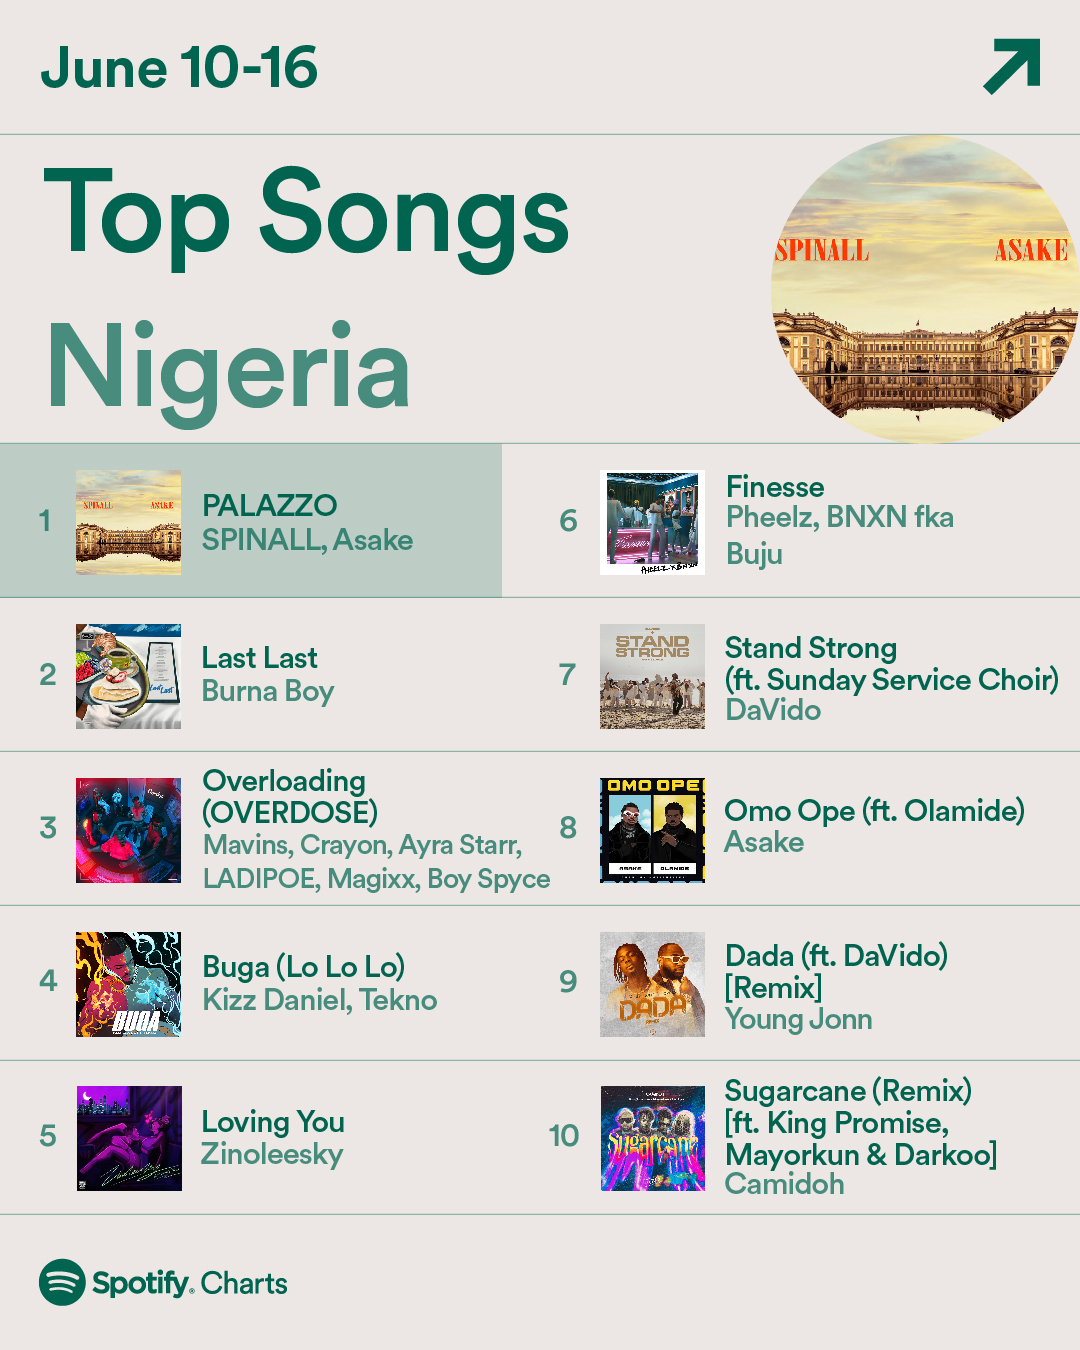 Spotify Charts Top trending songs and artists on Nigeria’s charts this